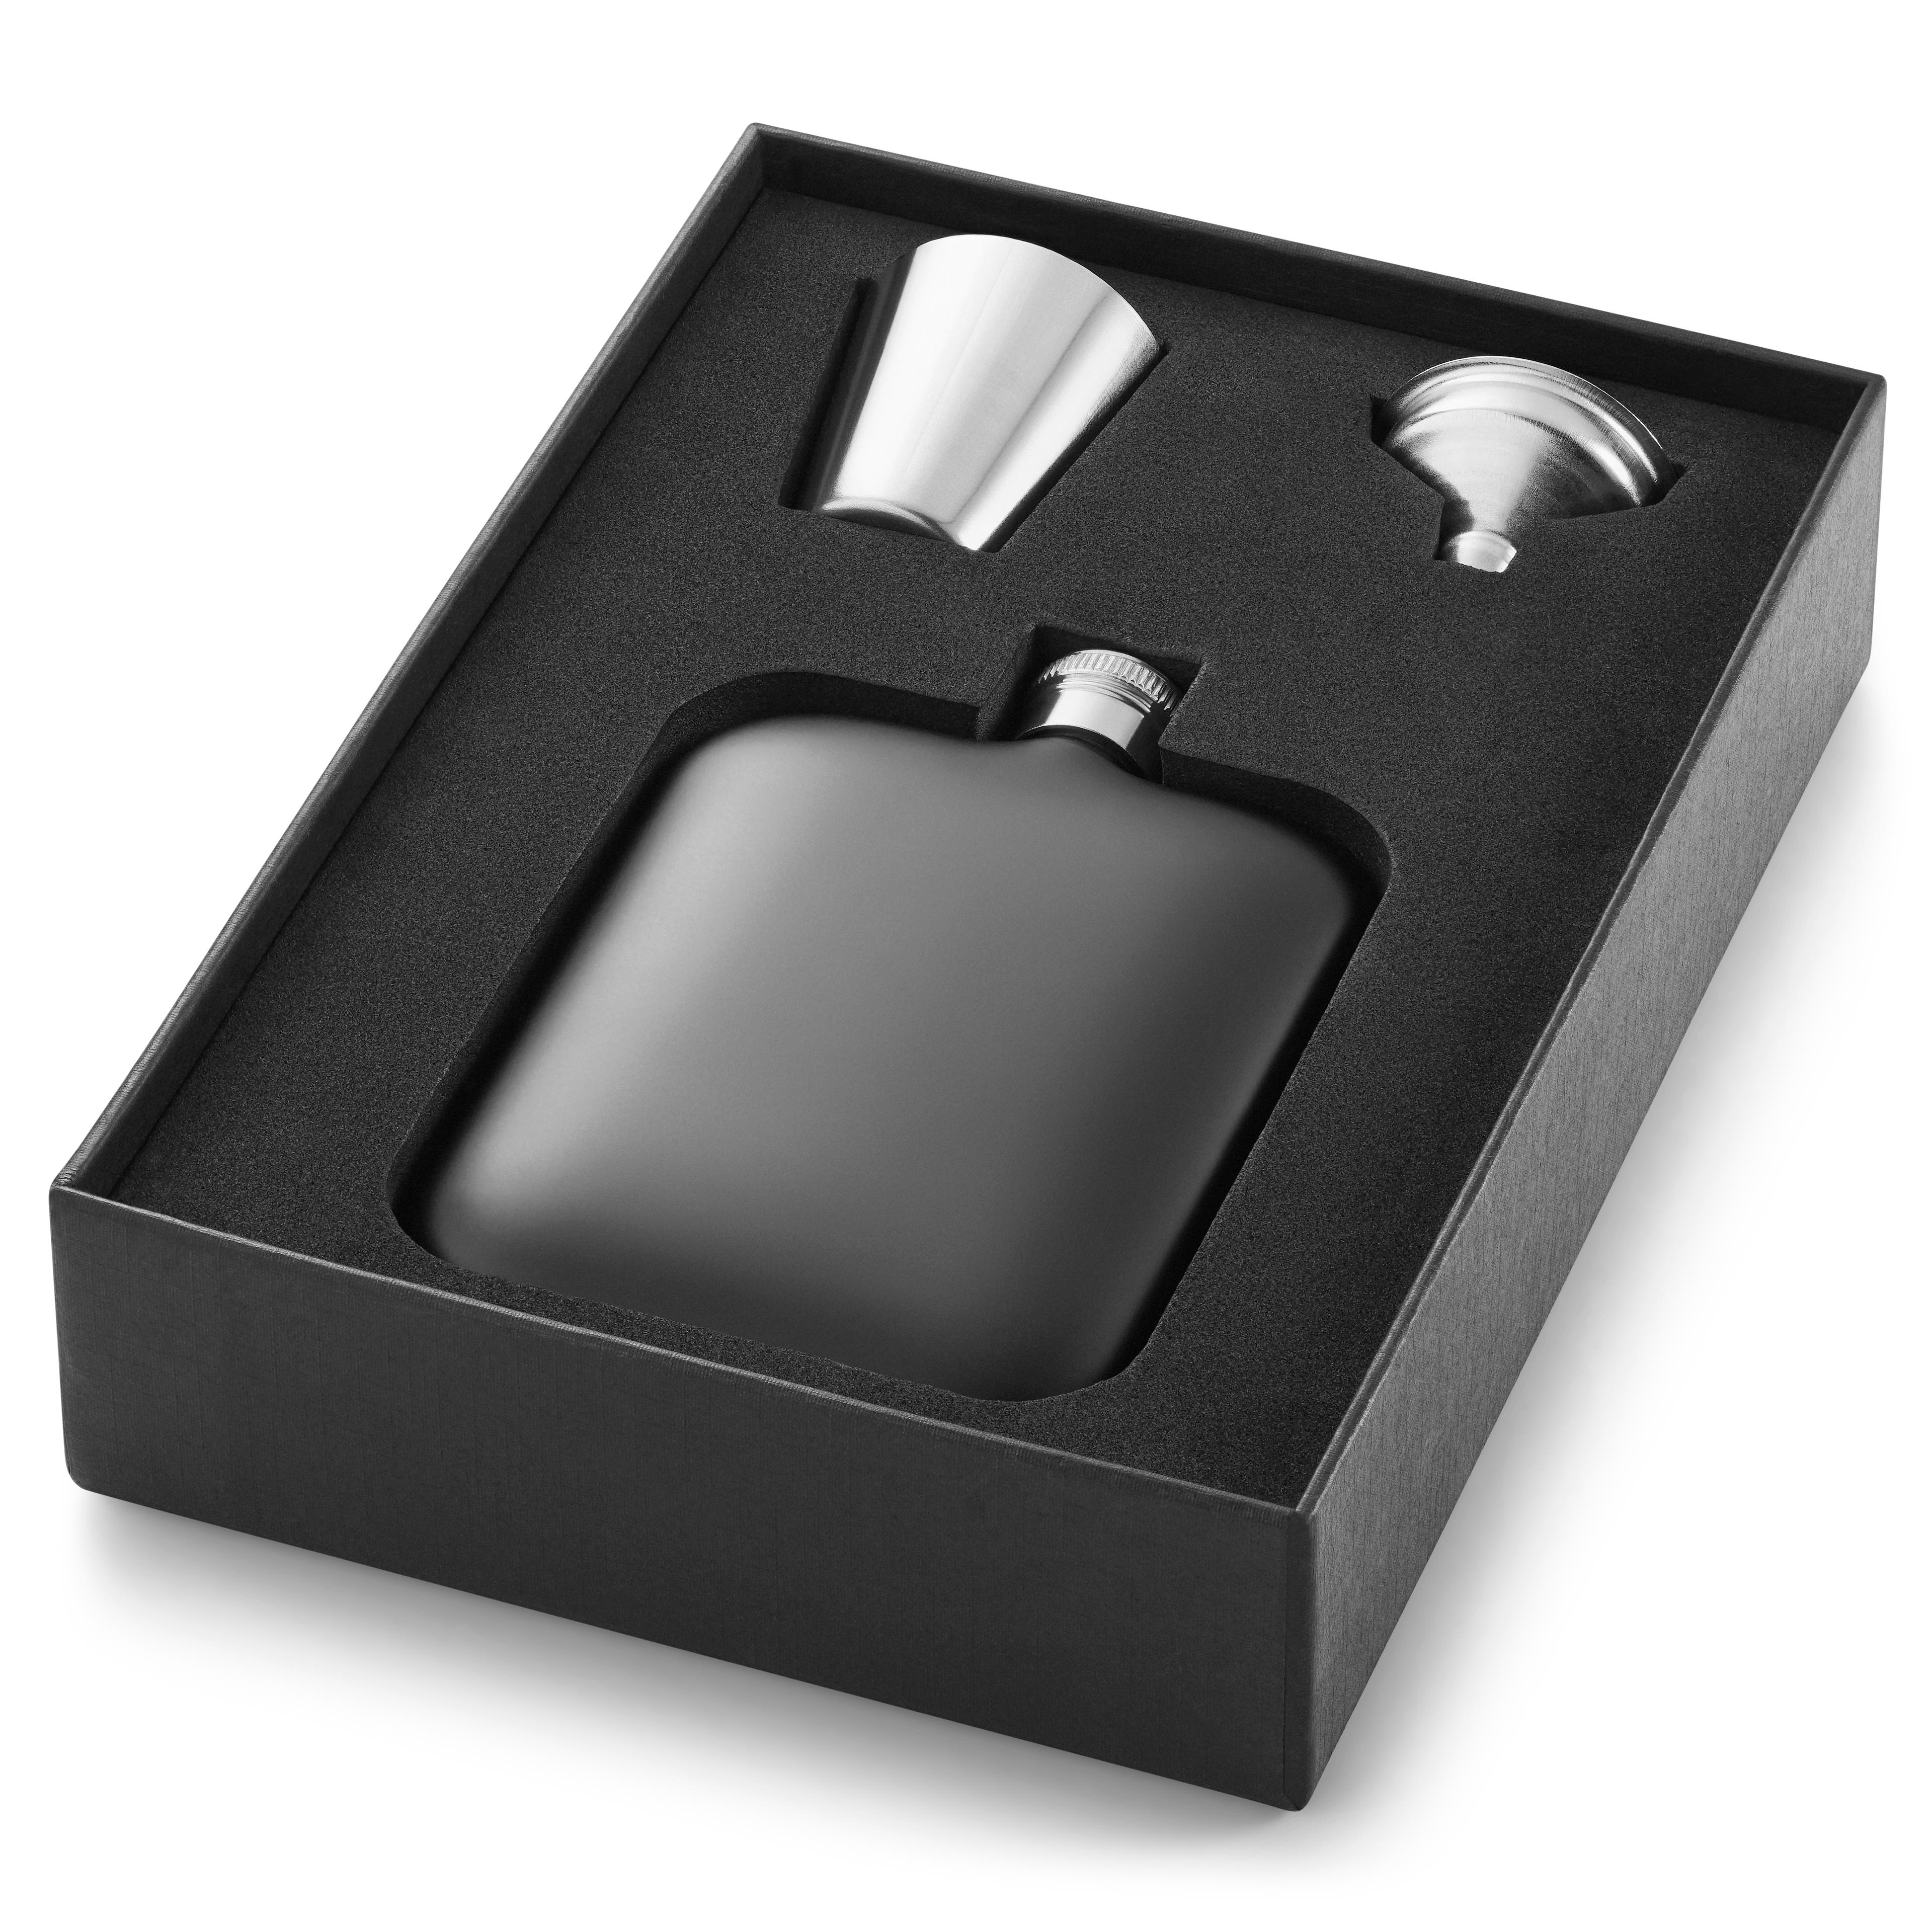 Black Stainless Steel Hip Flask and Shot Glass Set